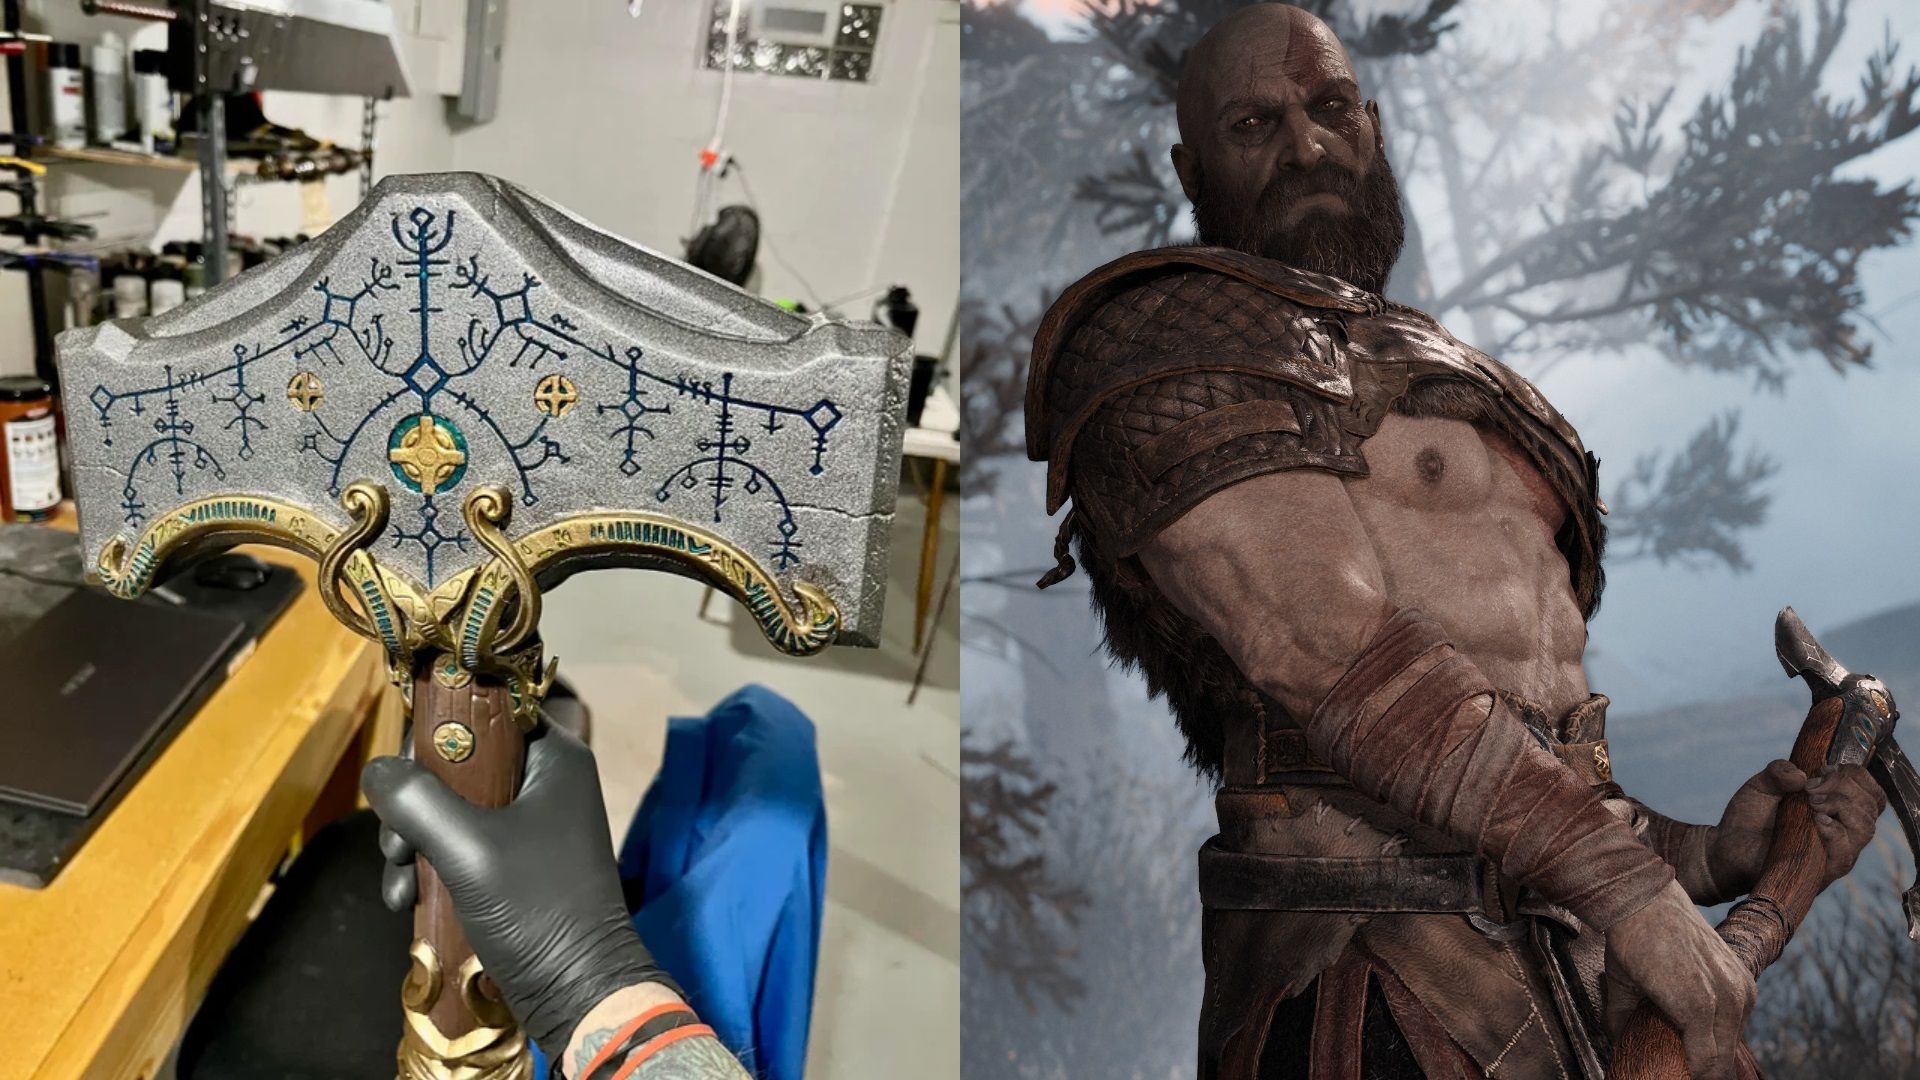 If Kratos was capable of controlling mjolnir after this happened how do you  think the fight would've ended? : r/GodofWar